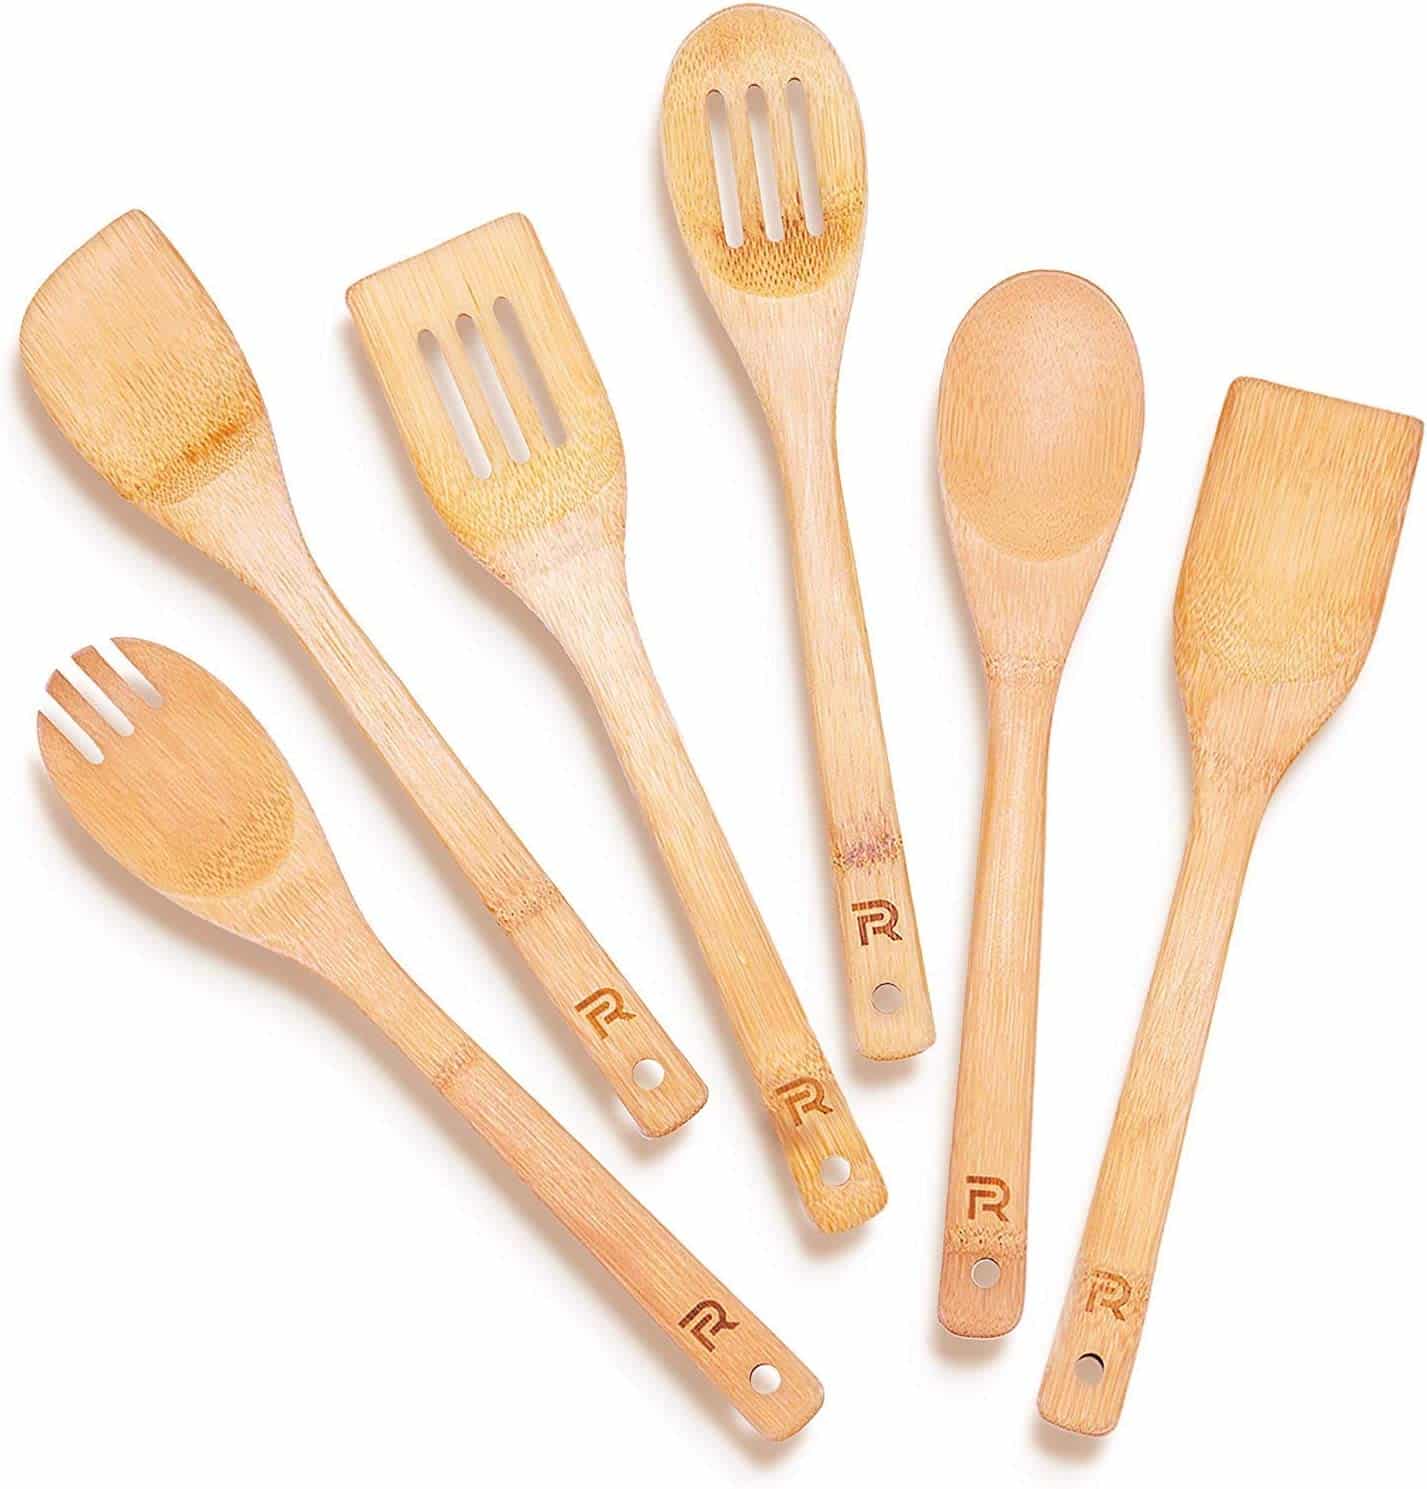 Non Toxic Wooden Cooking Utensils 6